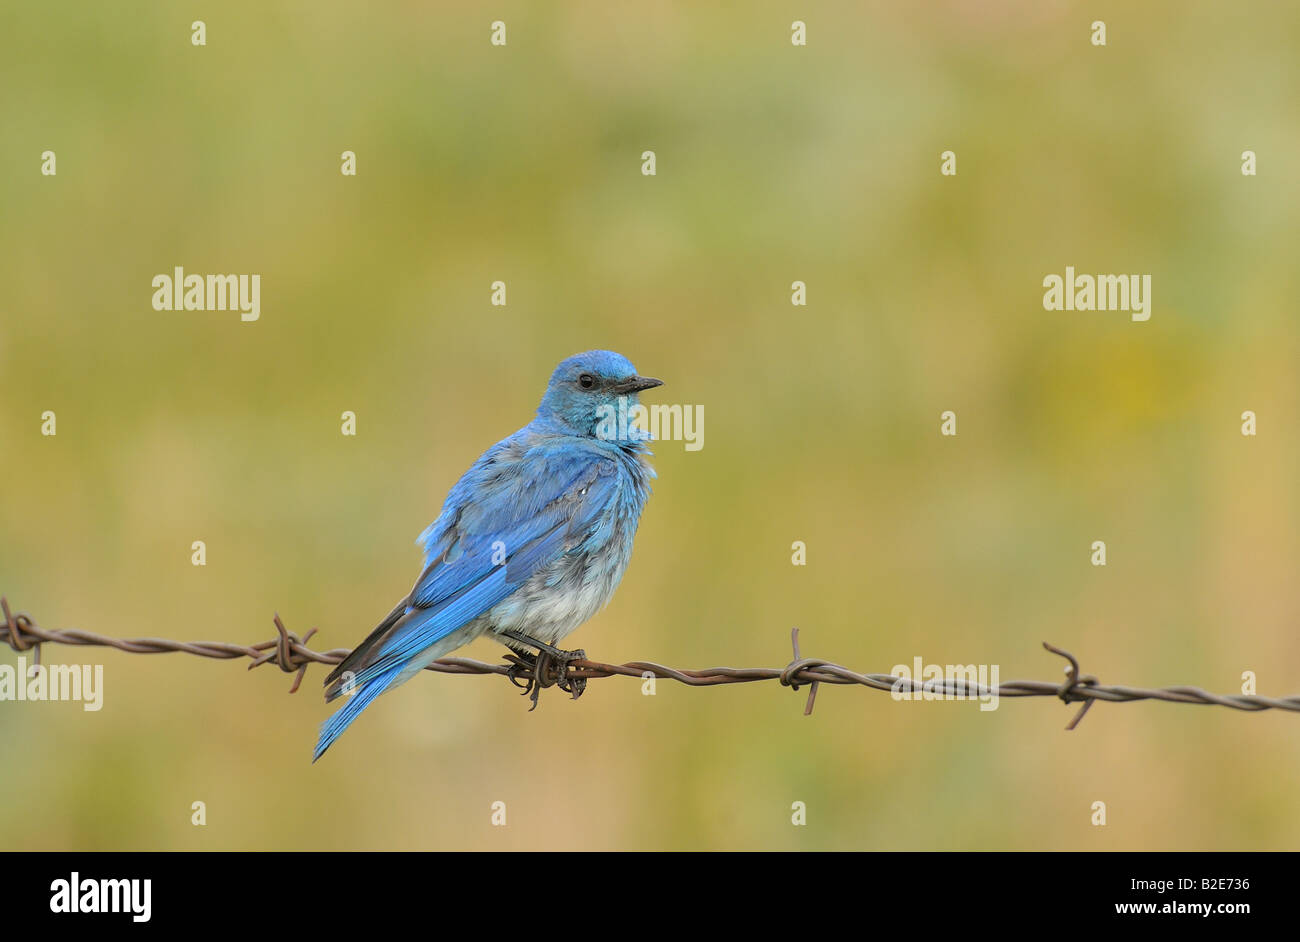 A male mountain blue bird sits perched on a barbed wire fence Stock Photo